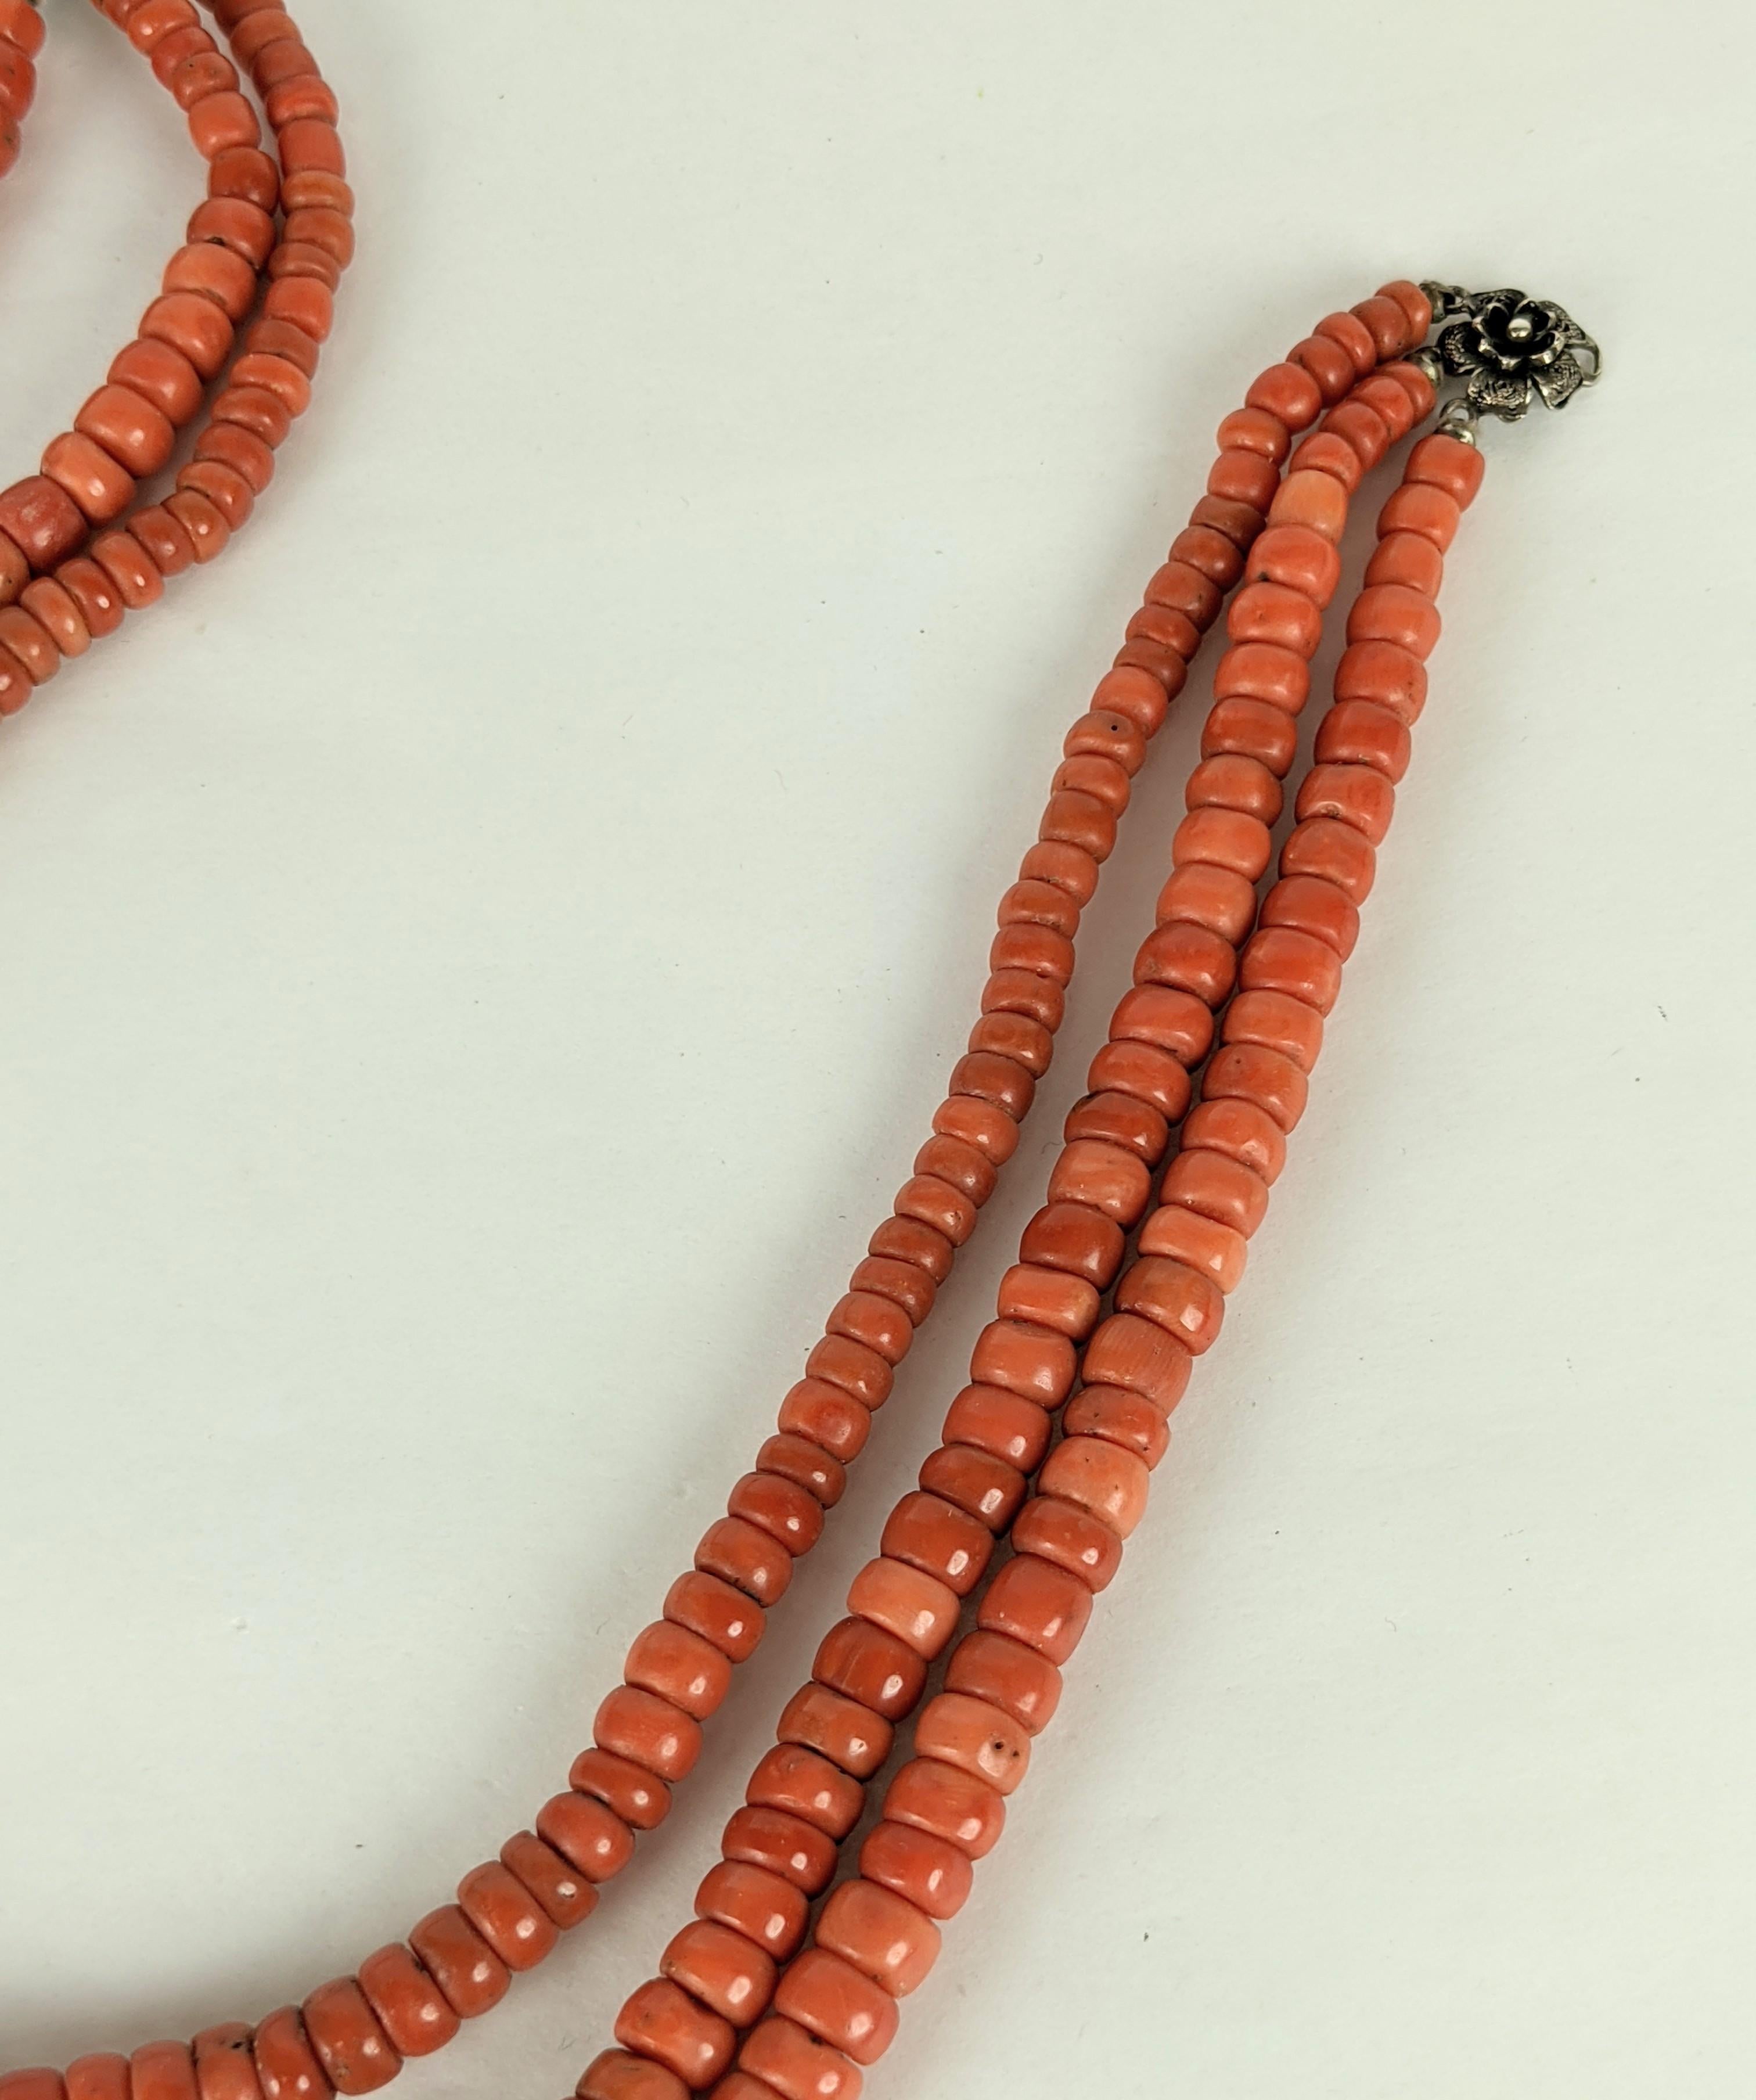 Rare 3 strand Antique Genuine Coral Beads with silver filigreed clasp. Hard to find natural untreated coral with graduated toggle beads circa 1900, Italy.  Color is more red than images.
15